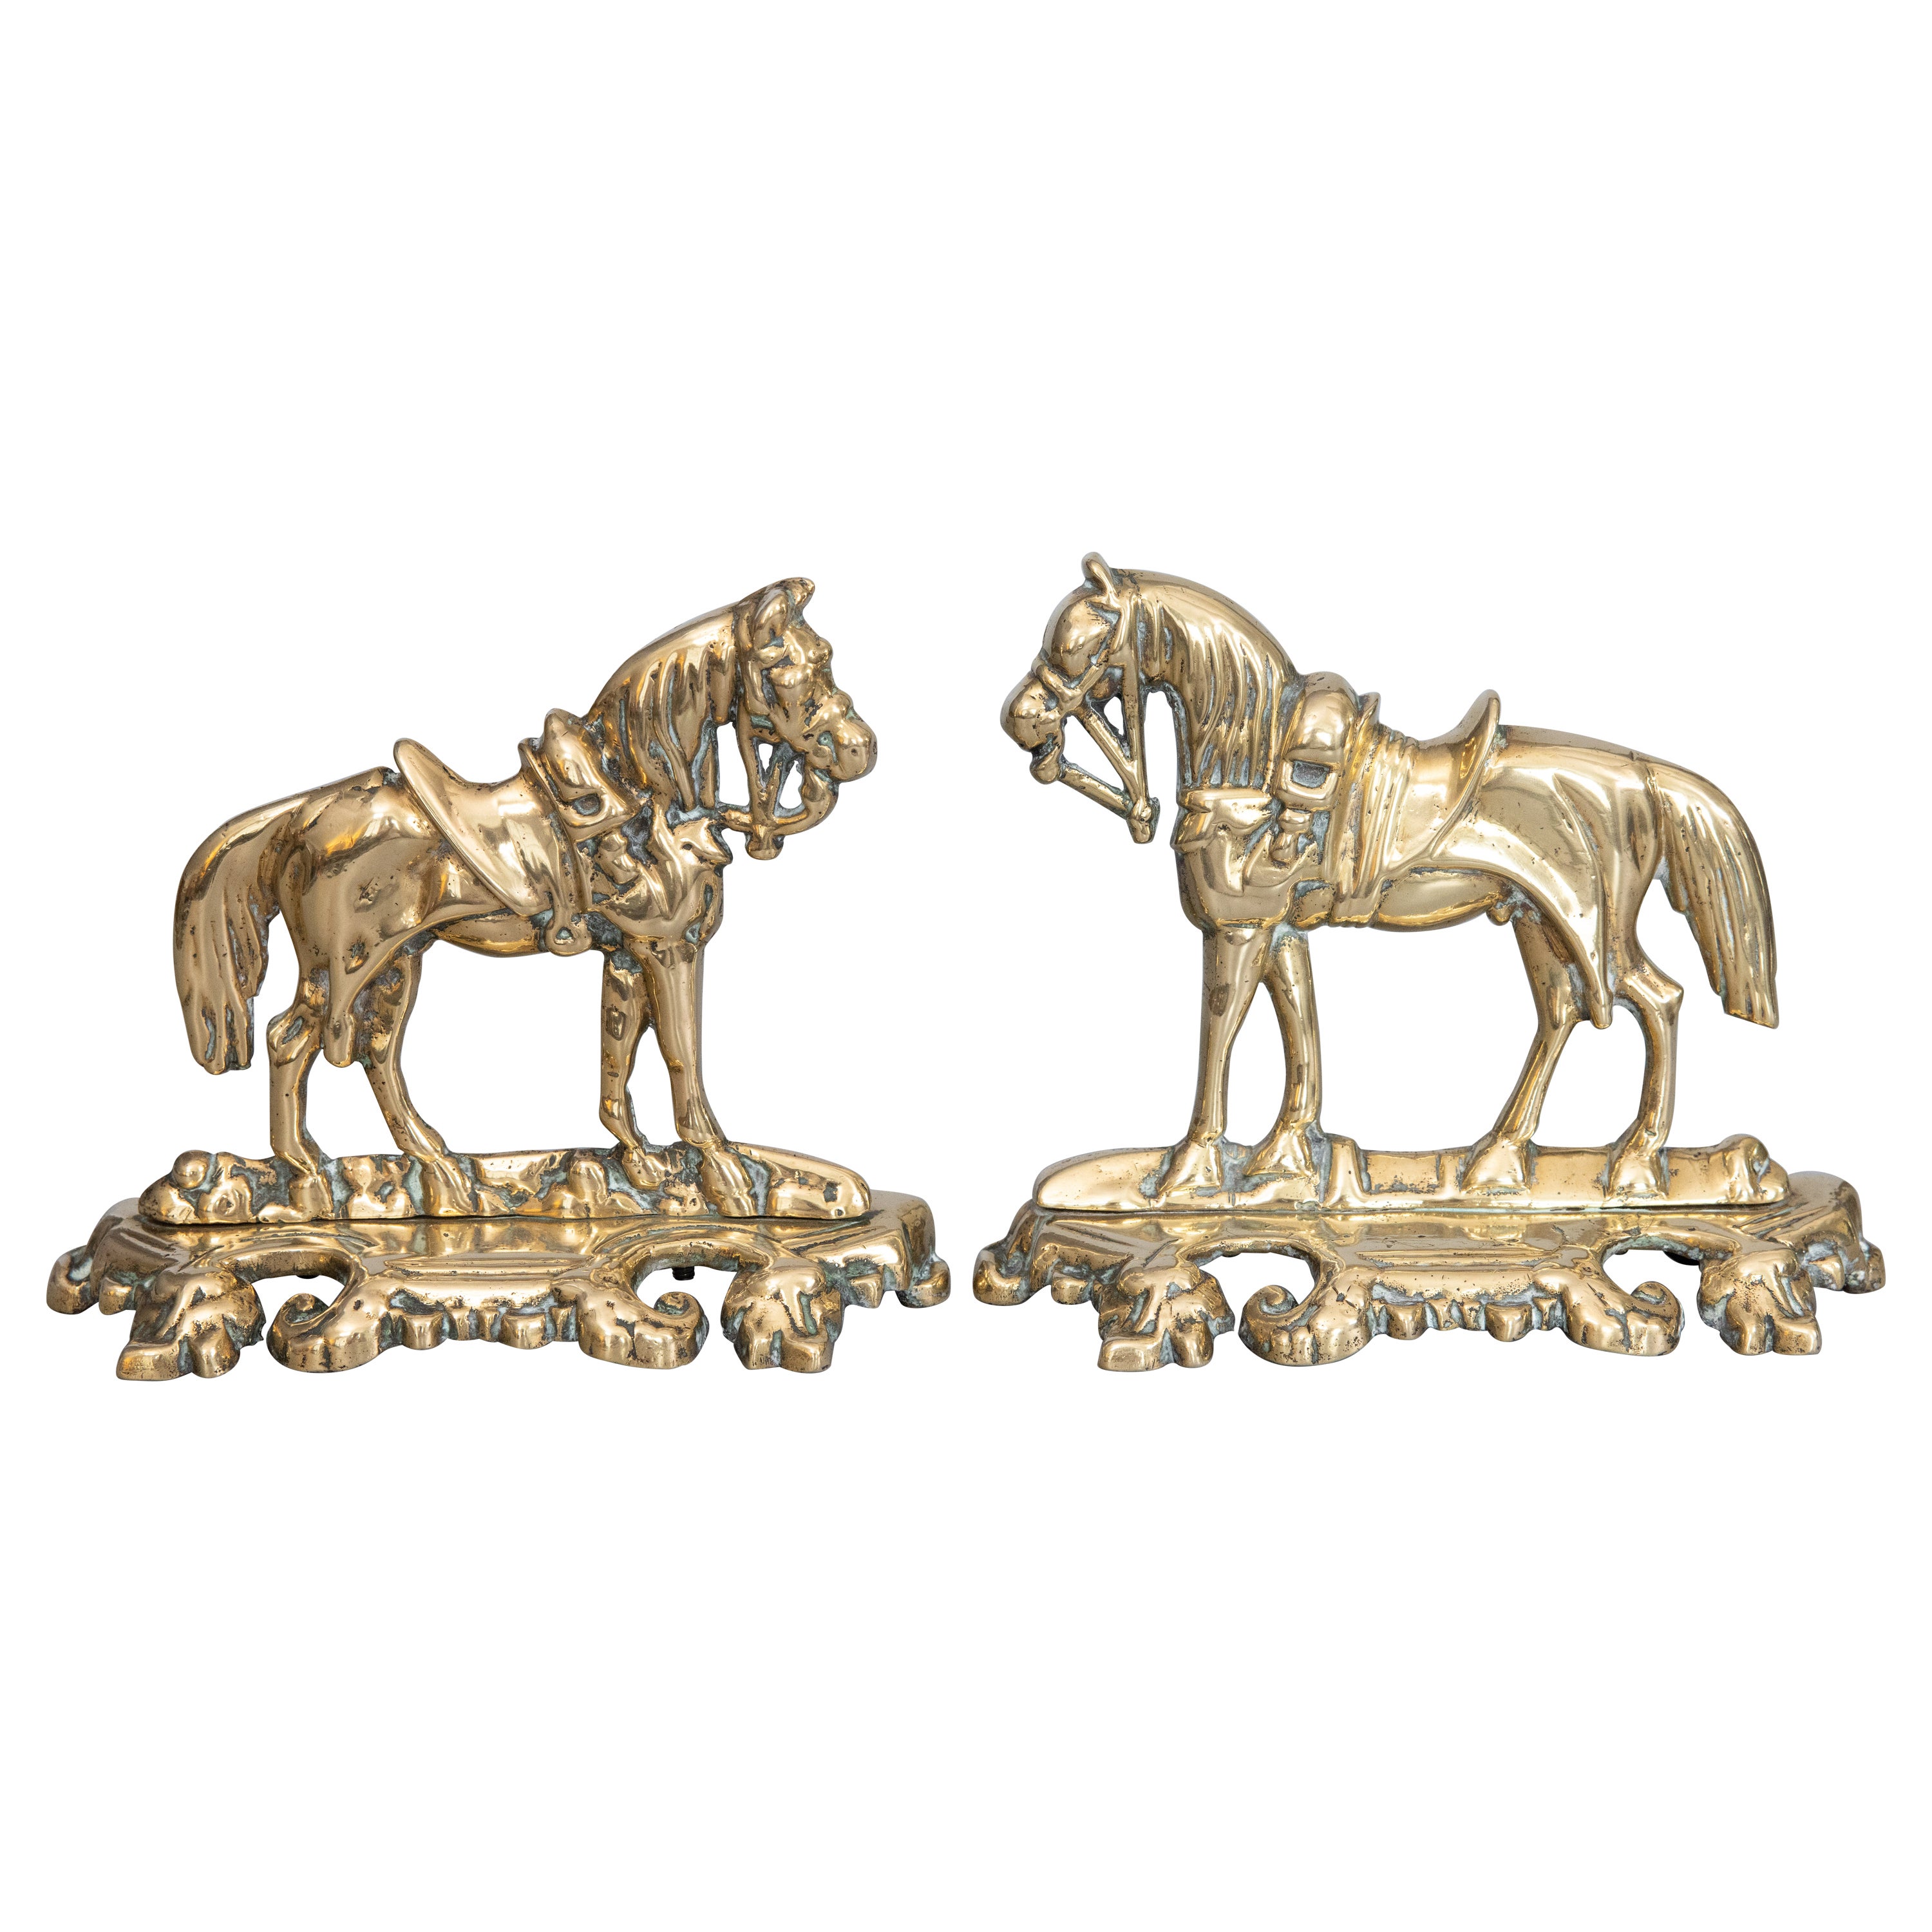 Pair of 19th C. English Equestrian Brass Horses Mantel Decorations For Sale